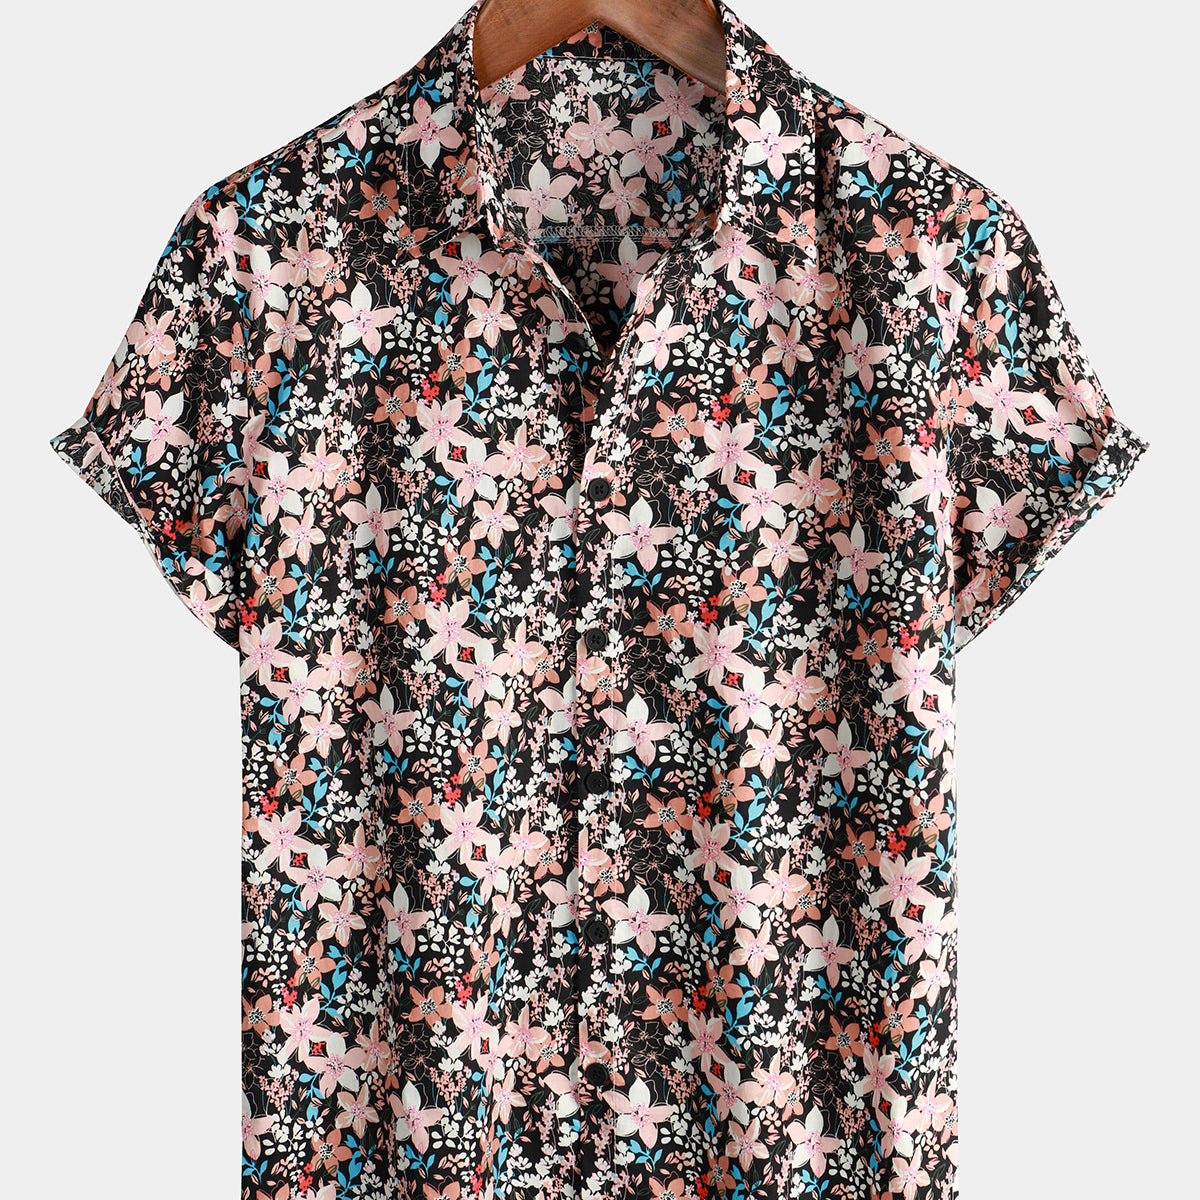 Men's Vintage Floral Print Holiday Casual Lapel Short Sleeve Button Up Shirt